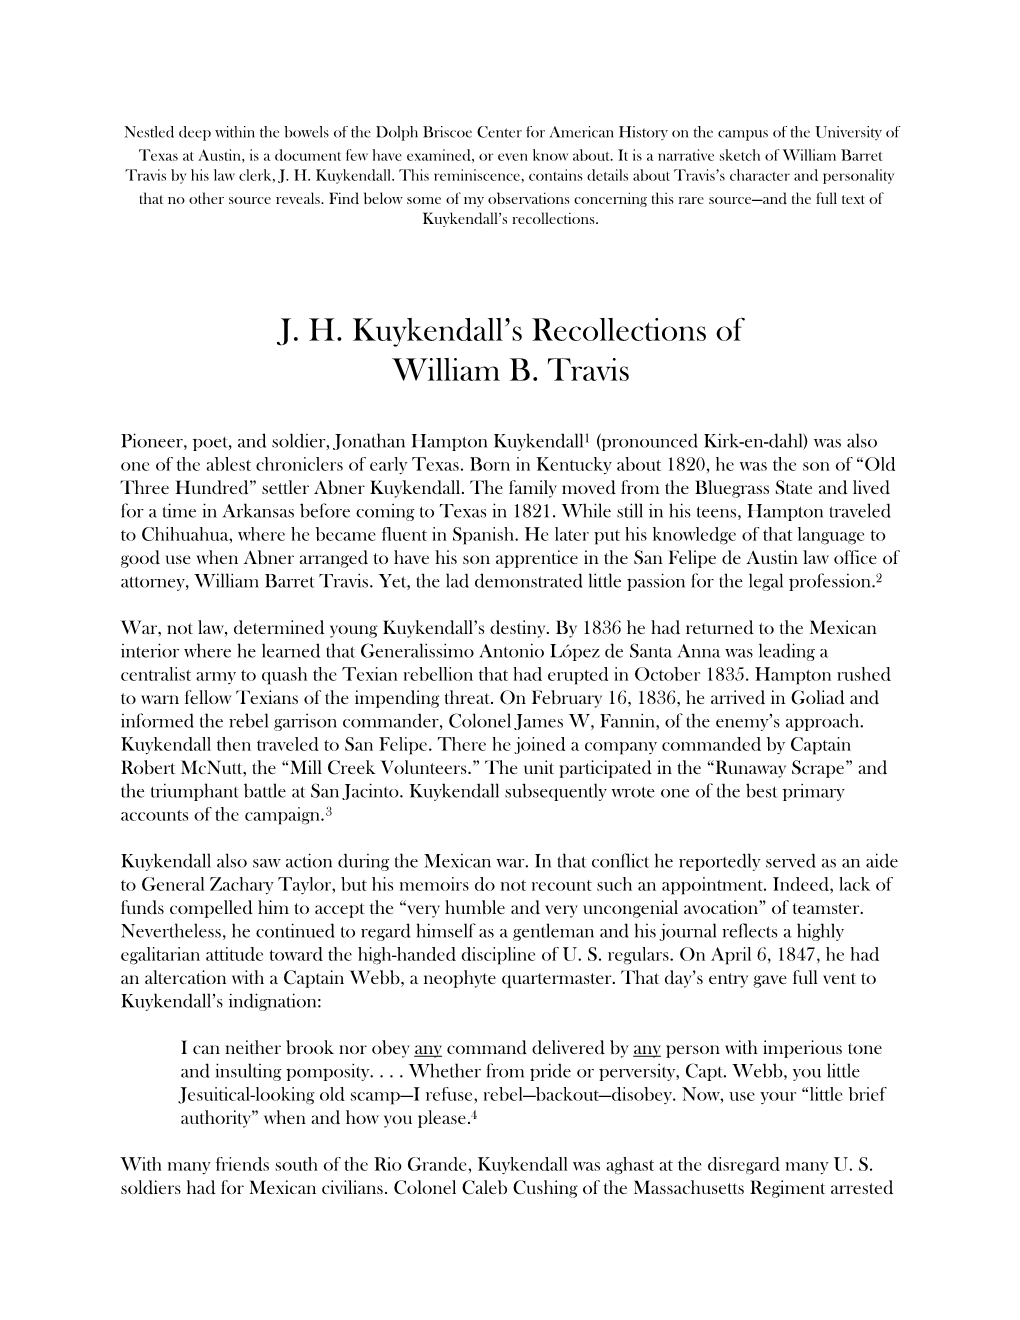 J. H. Kuykendall's Recollections of William B. Travis